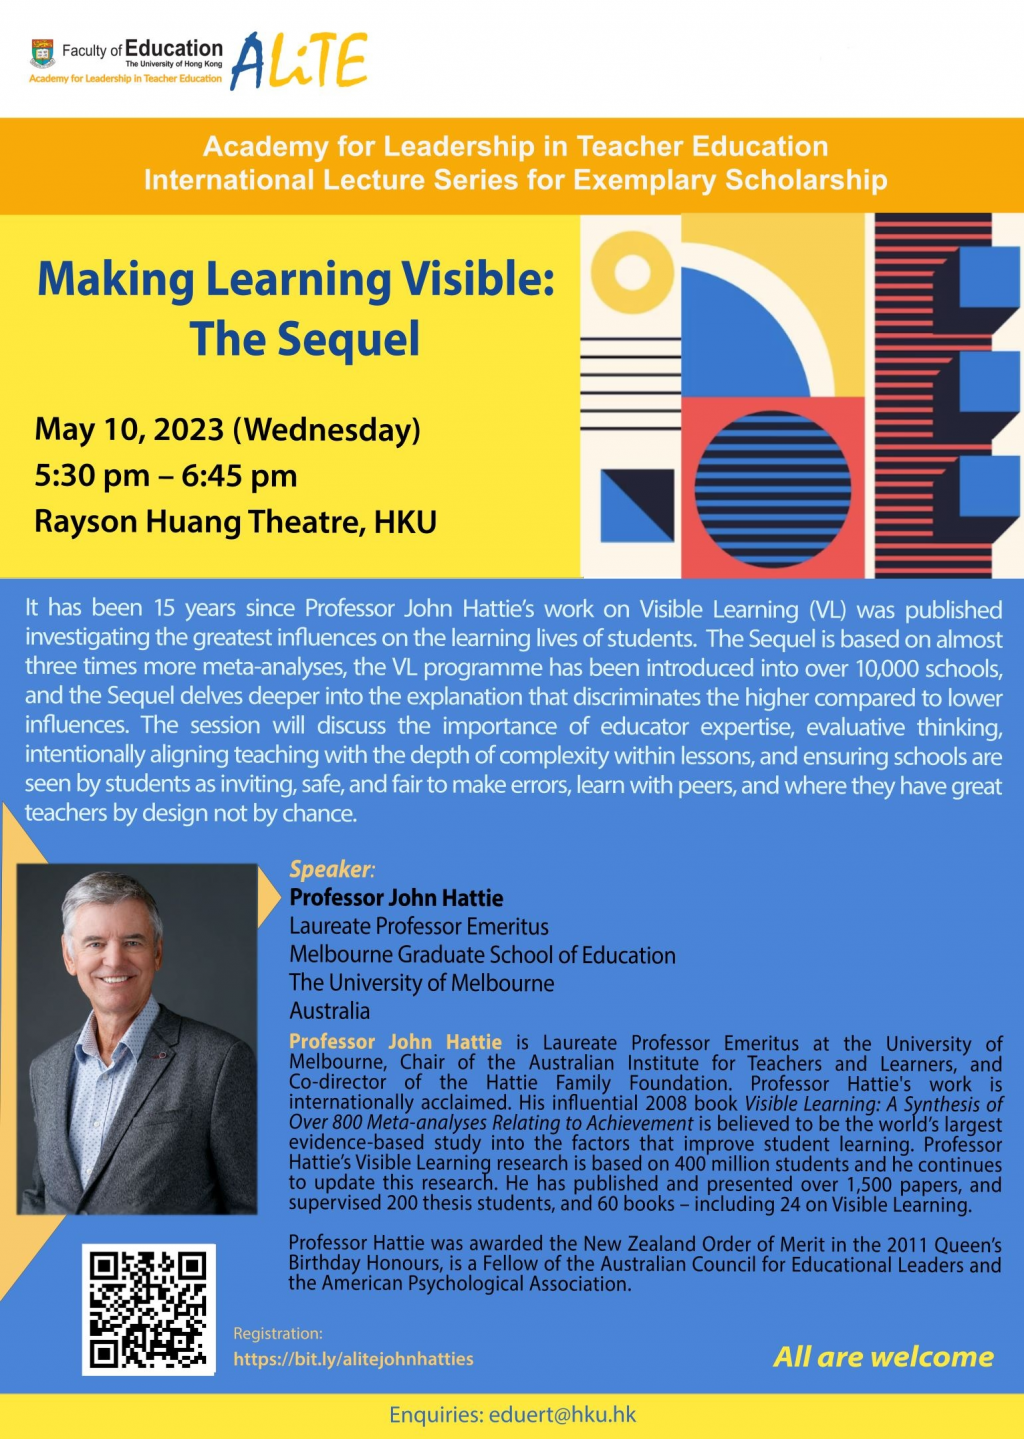 Making Learning Visible: The Sequel - ALiTE Lecture by Professor John Hattie